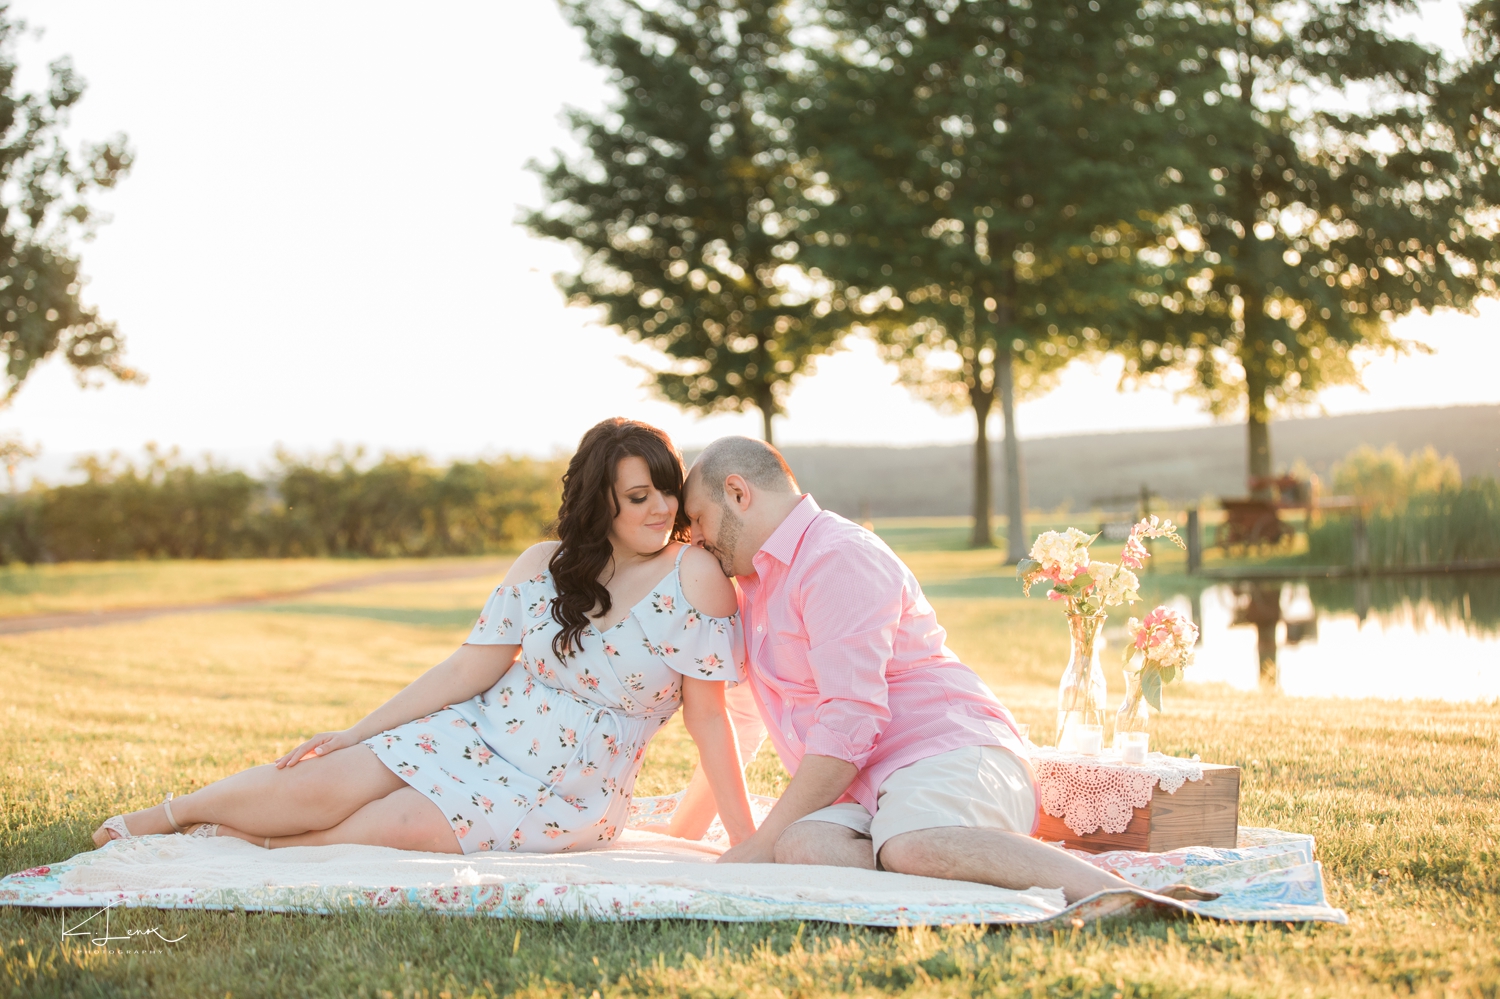 Alyson's orchard Engagement Session